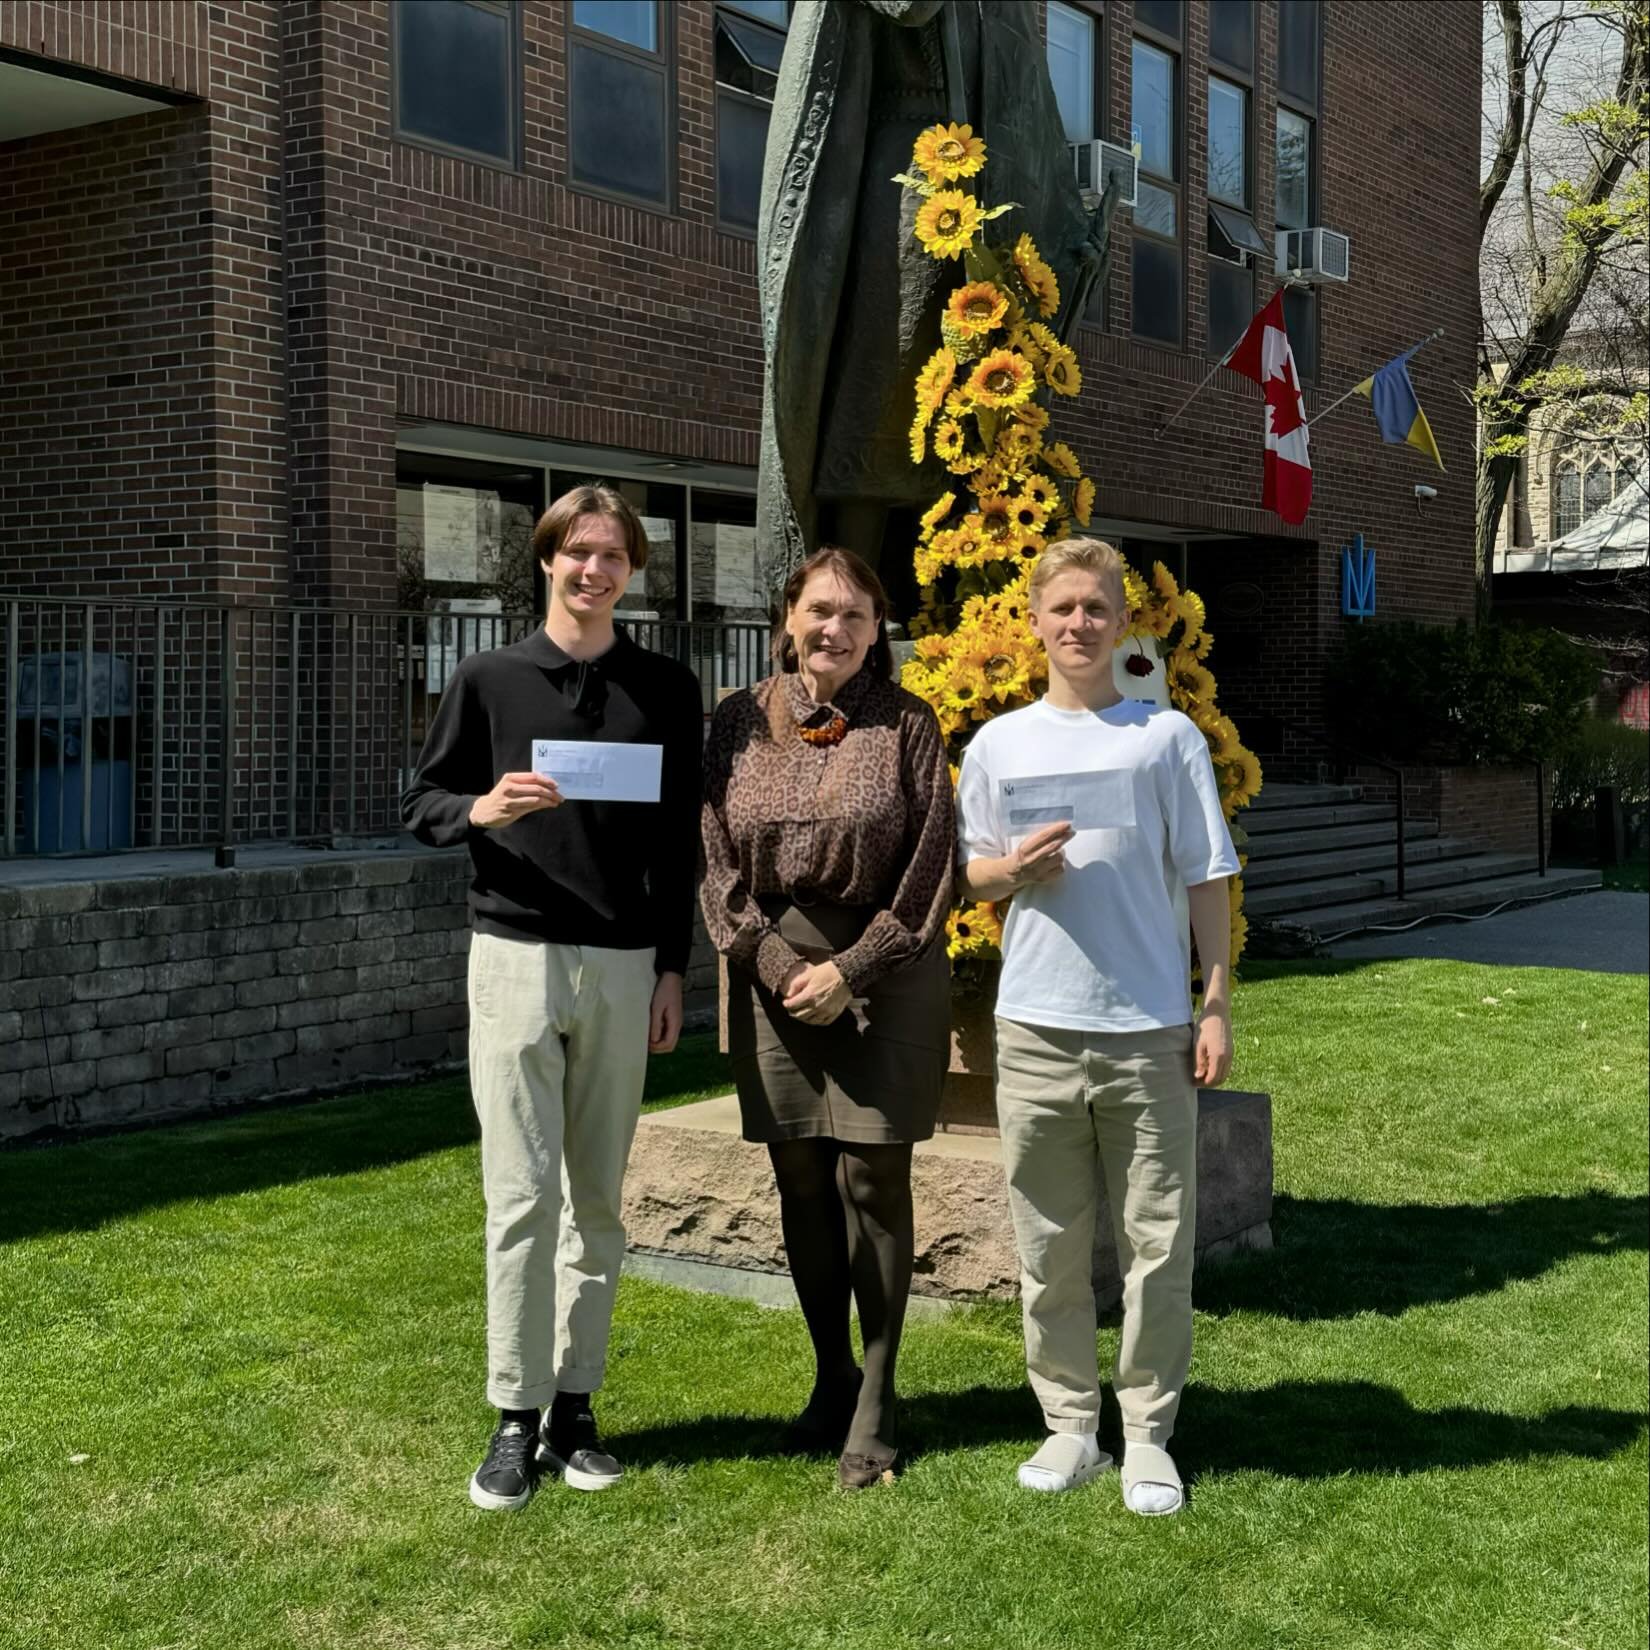 Congratulations to the recipients of the SVI scholarships this year!

This year SVI student residents Denys Svoboda (Arts and Science, Pharmacology, University of Toronto) and Roman Nykorovych (Music Performance, Artist Diploma Program at Glenn Gould